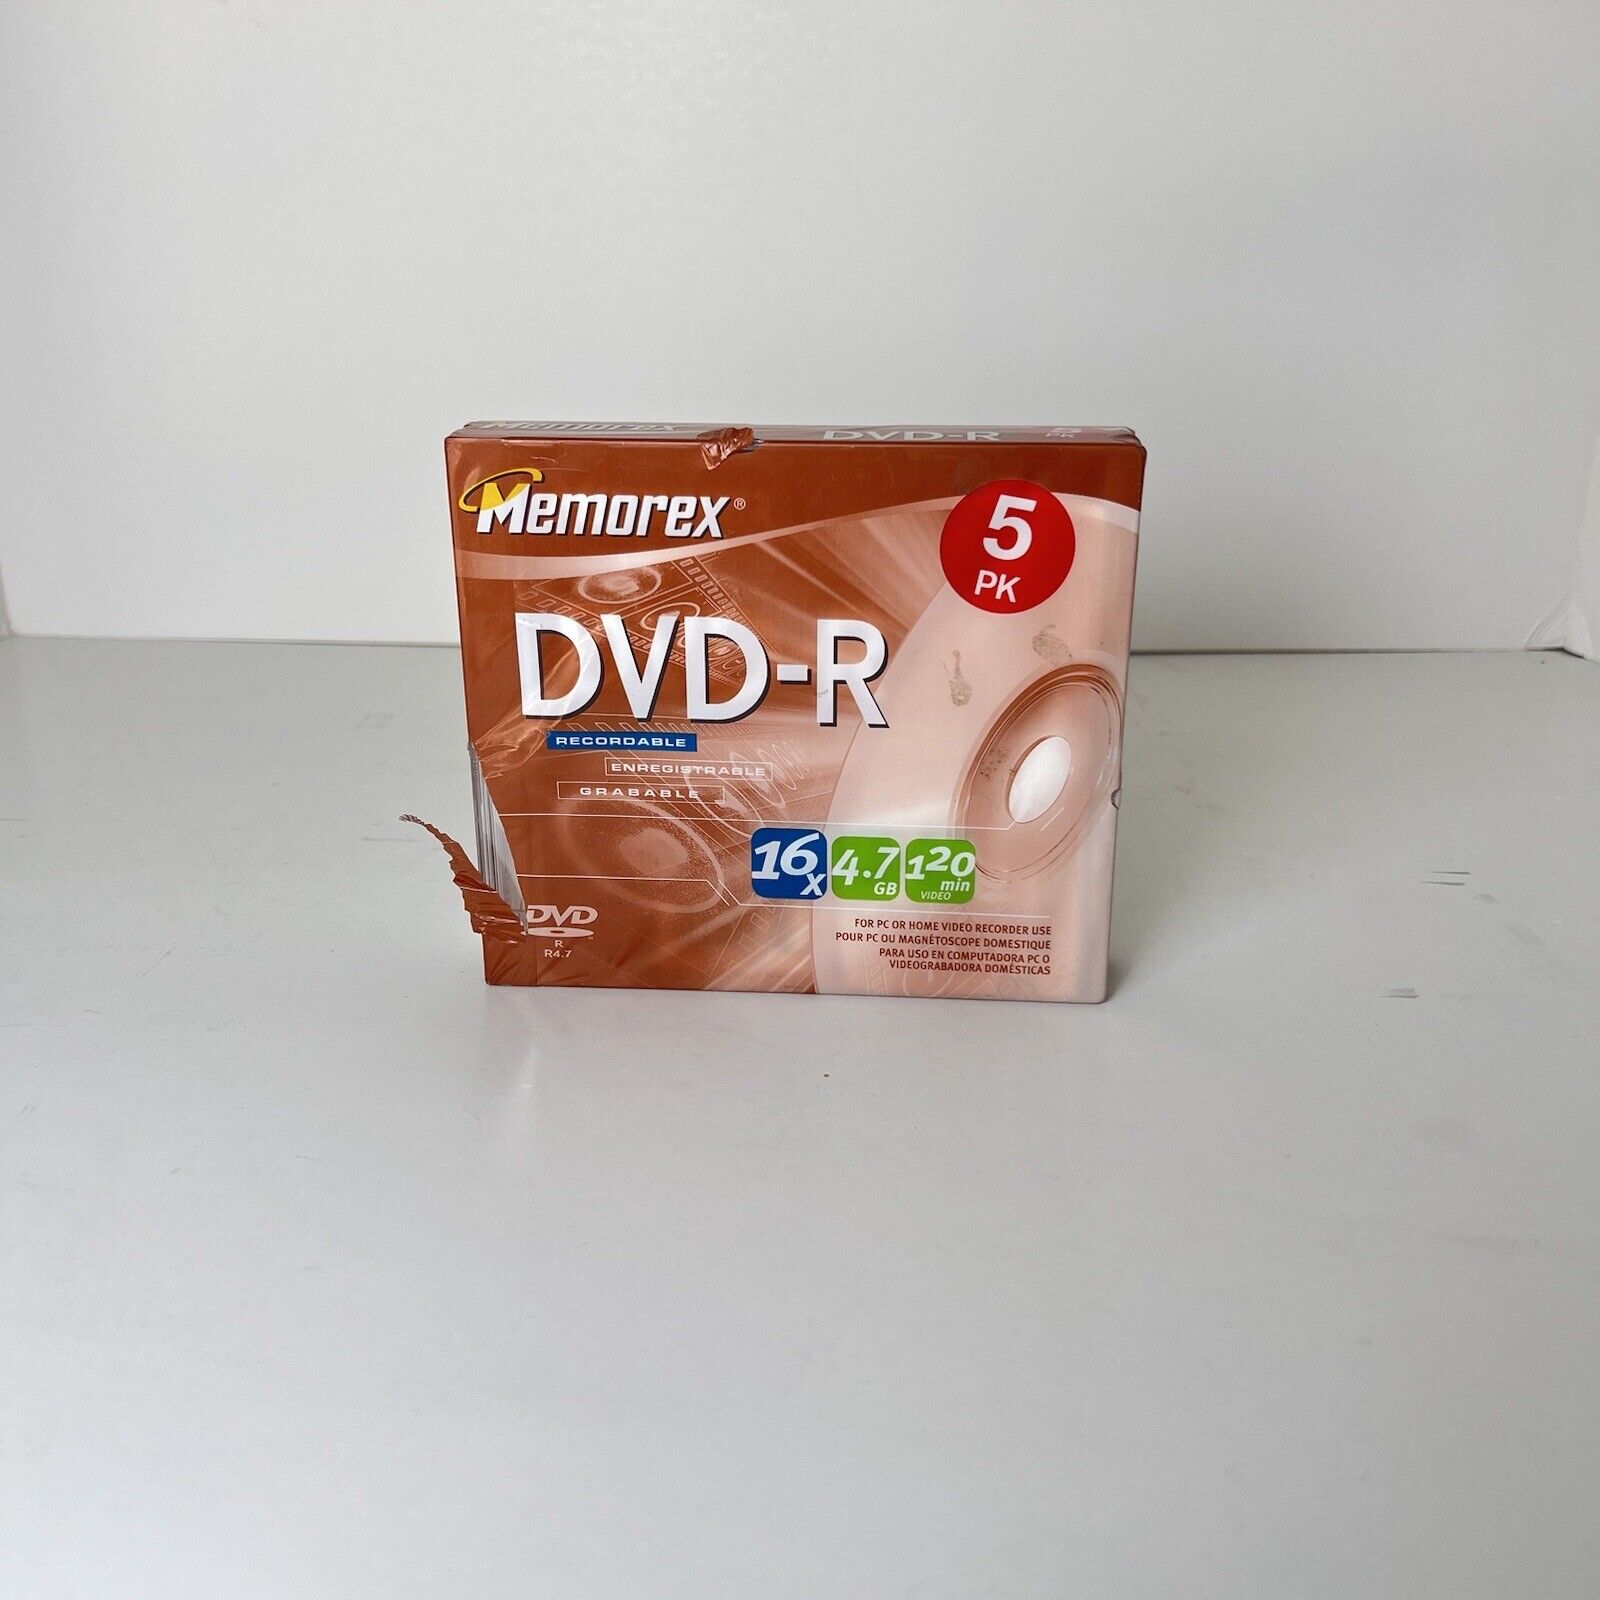 Memorex DVD-R 5 Pack 16X 4.7GB Recordable 120 Min With Cases New Sealed Package